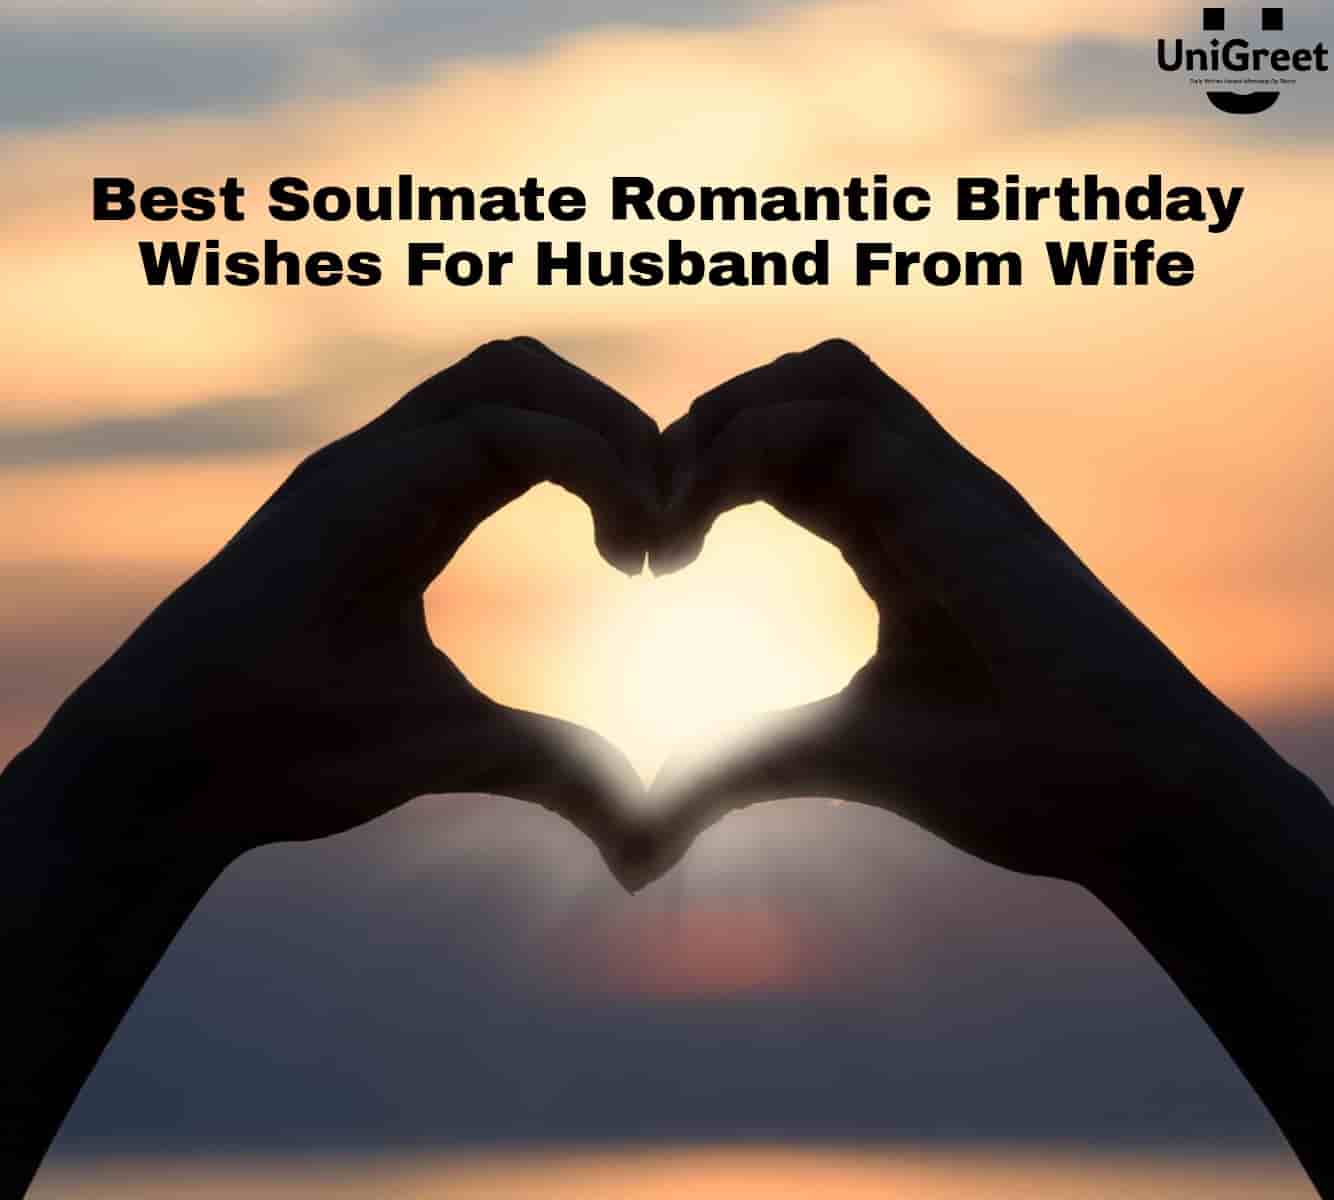 Best Soulmate Romantic Birthday Wishes For Husband From Wife